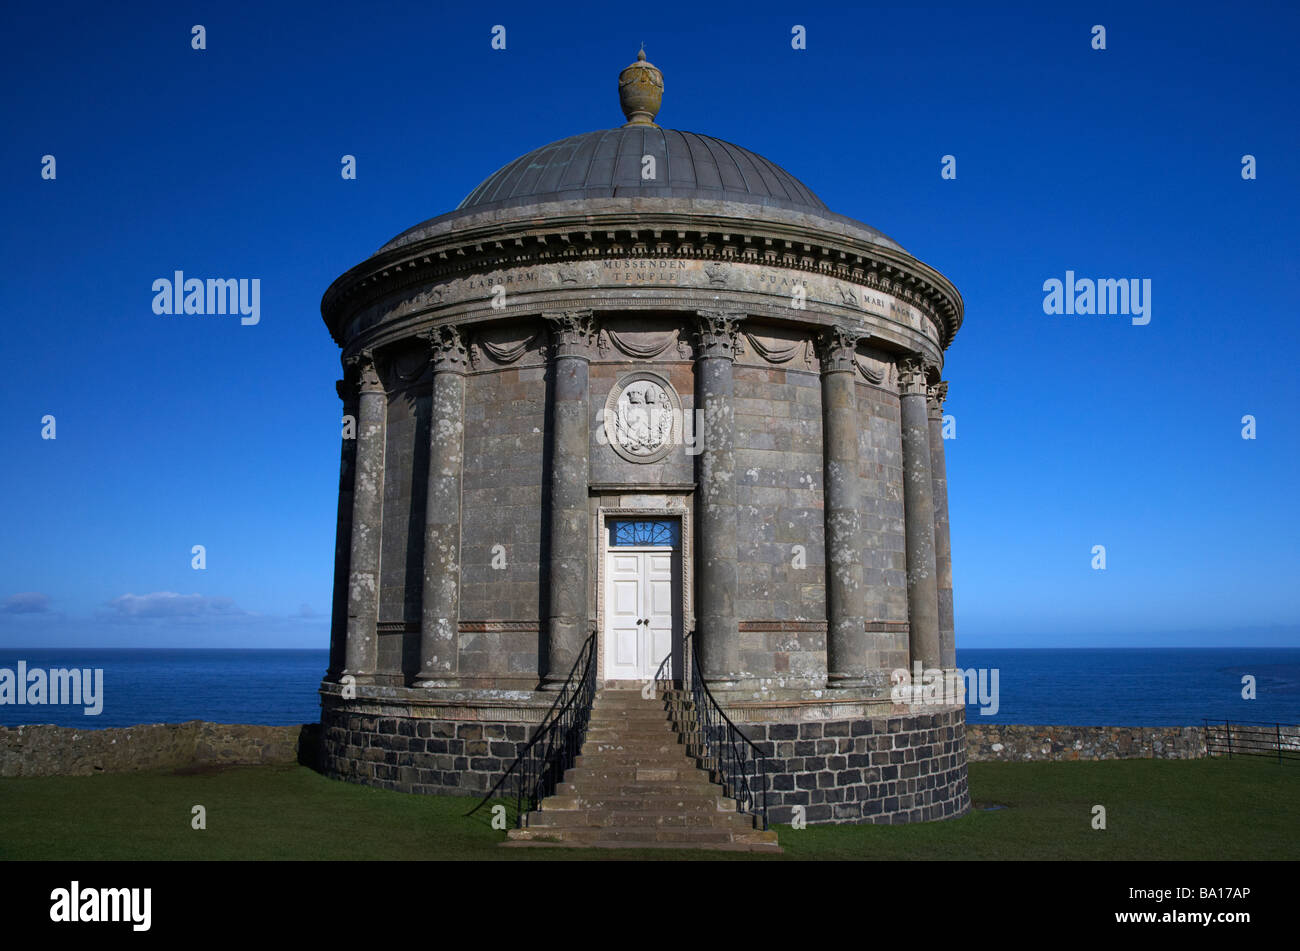 Mussenden Temple downhill county londonderry derry northern ireland Stock Photo